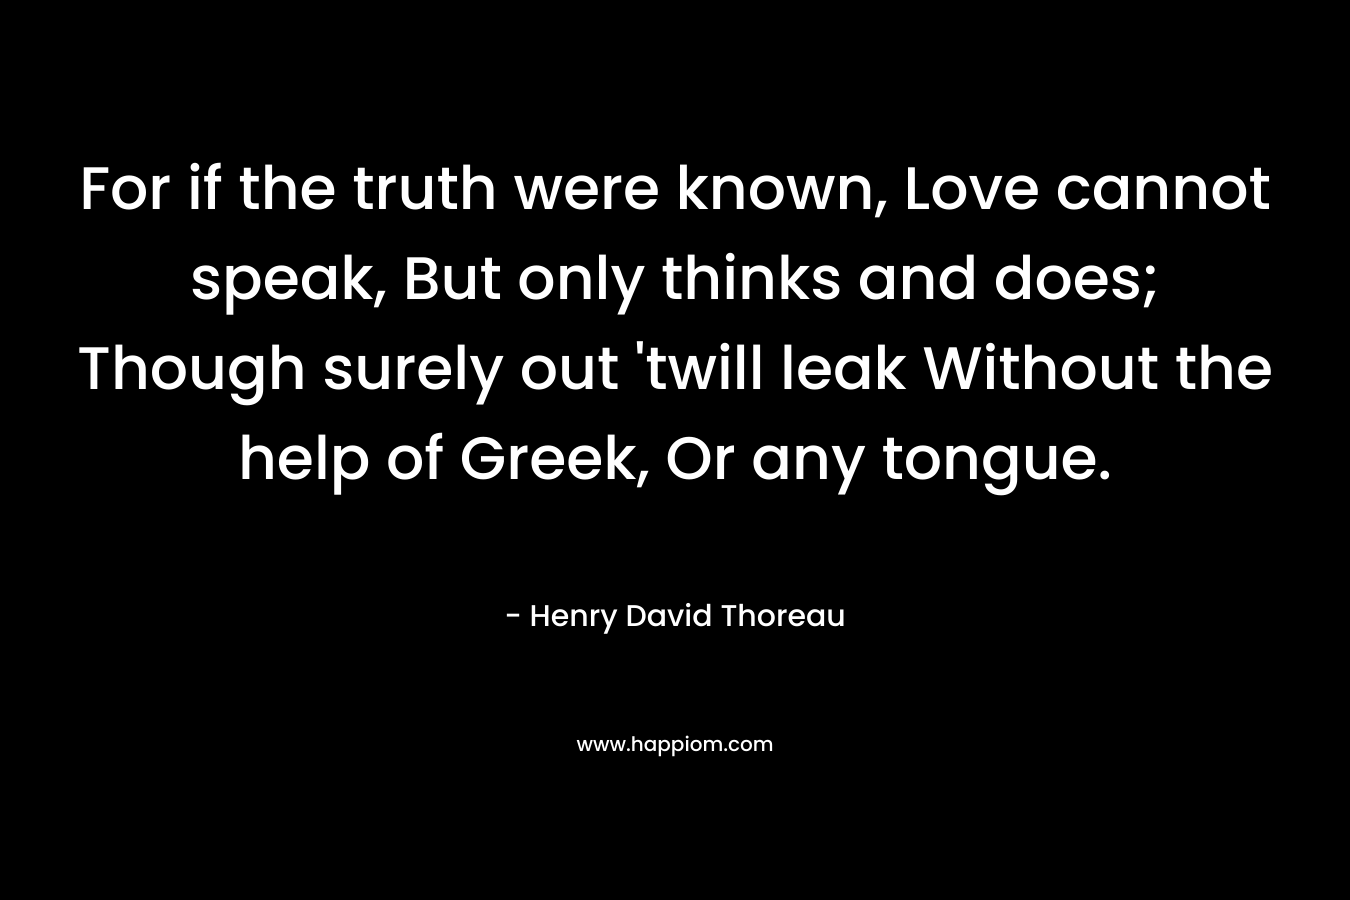 For if the truth were known, Love cannot speak, But only thinks and does; Though surely out 'twill leak Without the help of Greek, Or any tongue.